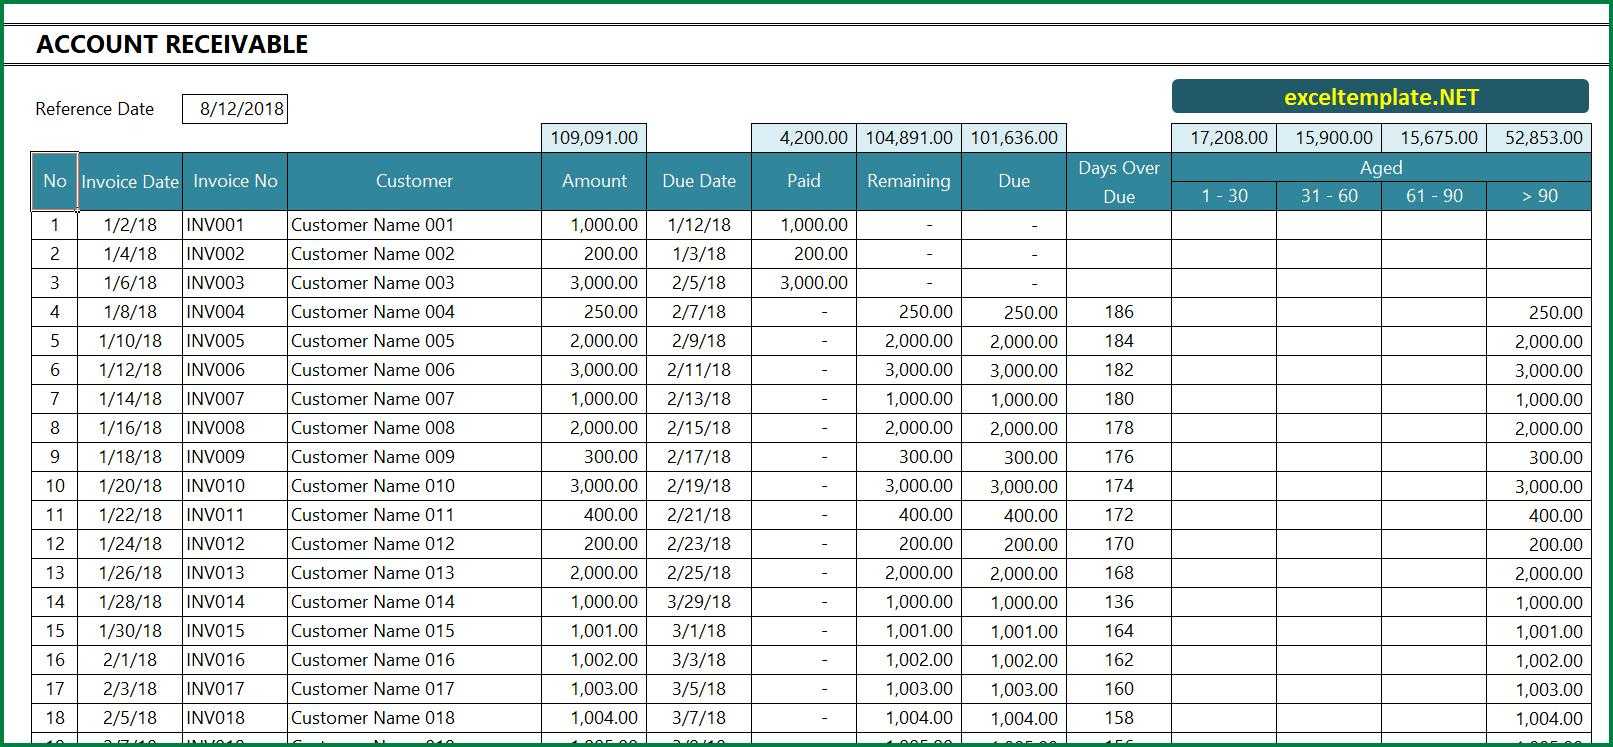 Account Receivable Excel Template With Accounts Receivable Report Template